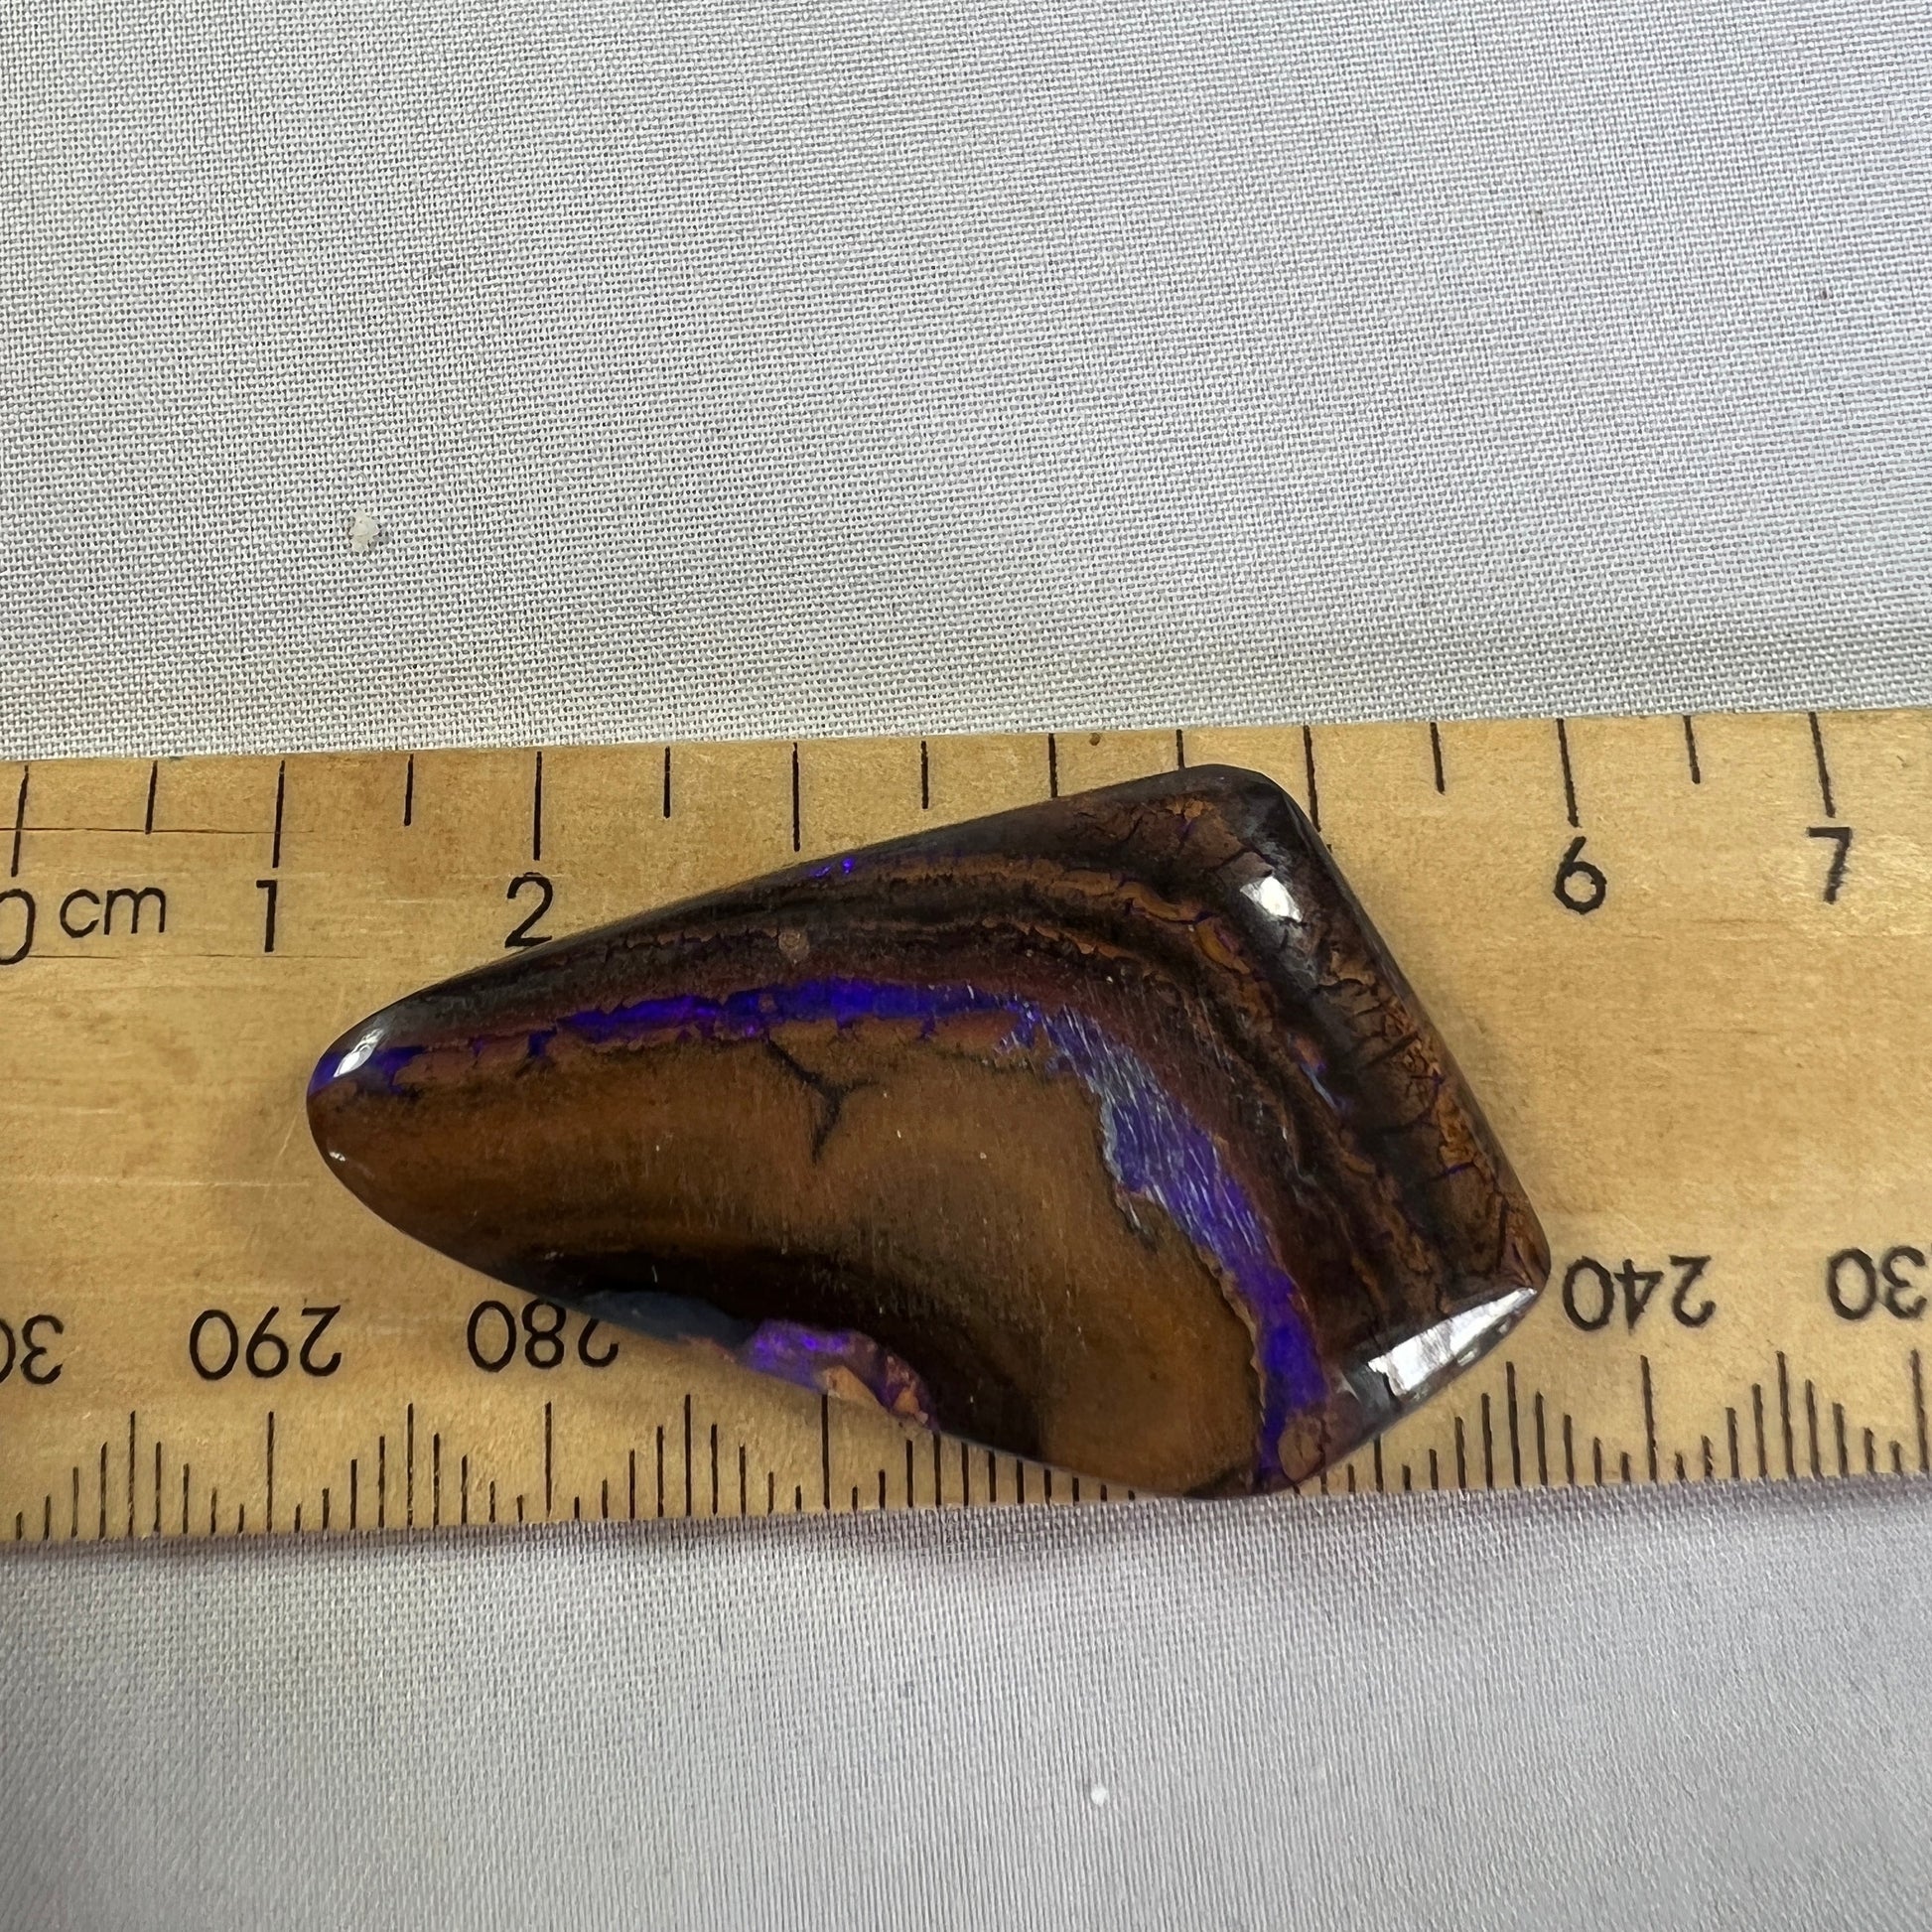 Nice chunky piece of boulder opal from Winton. Would make a great pendant.